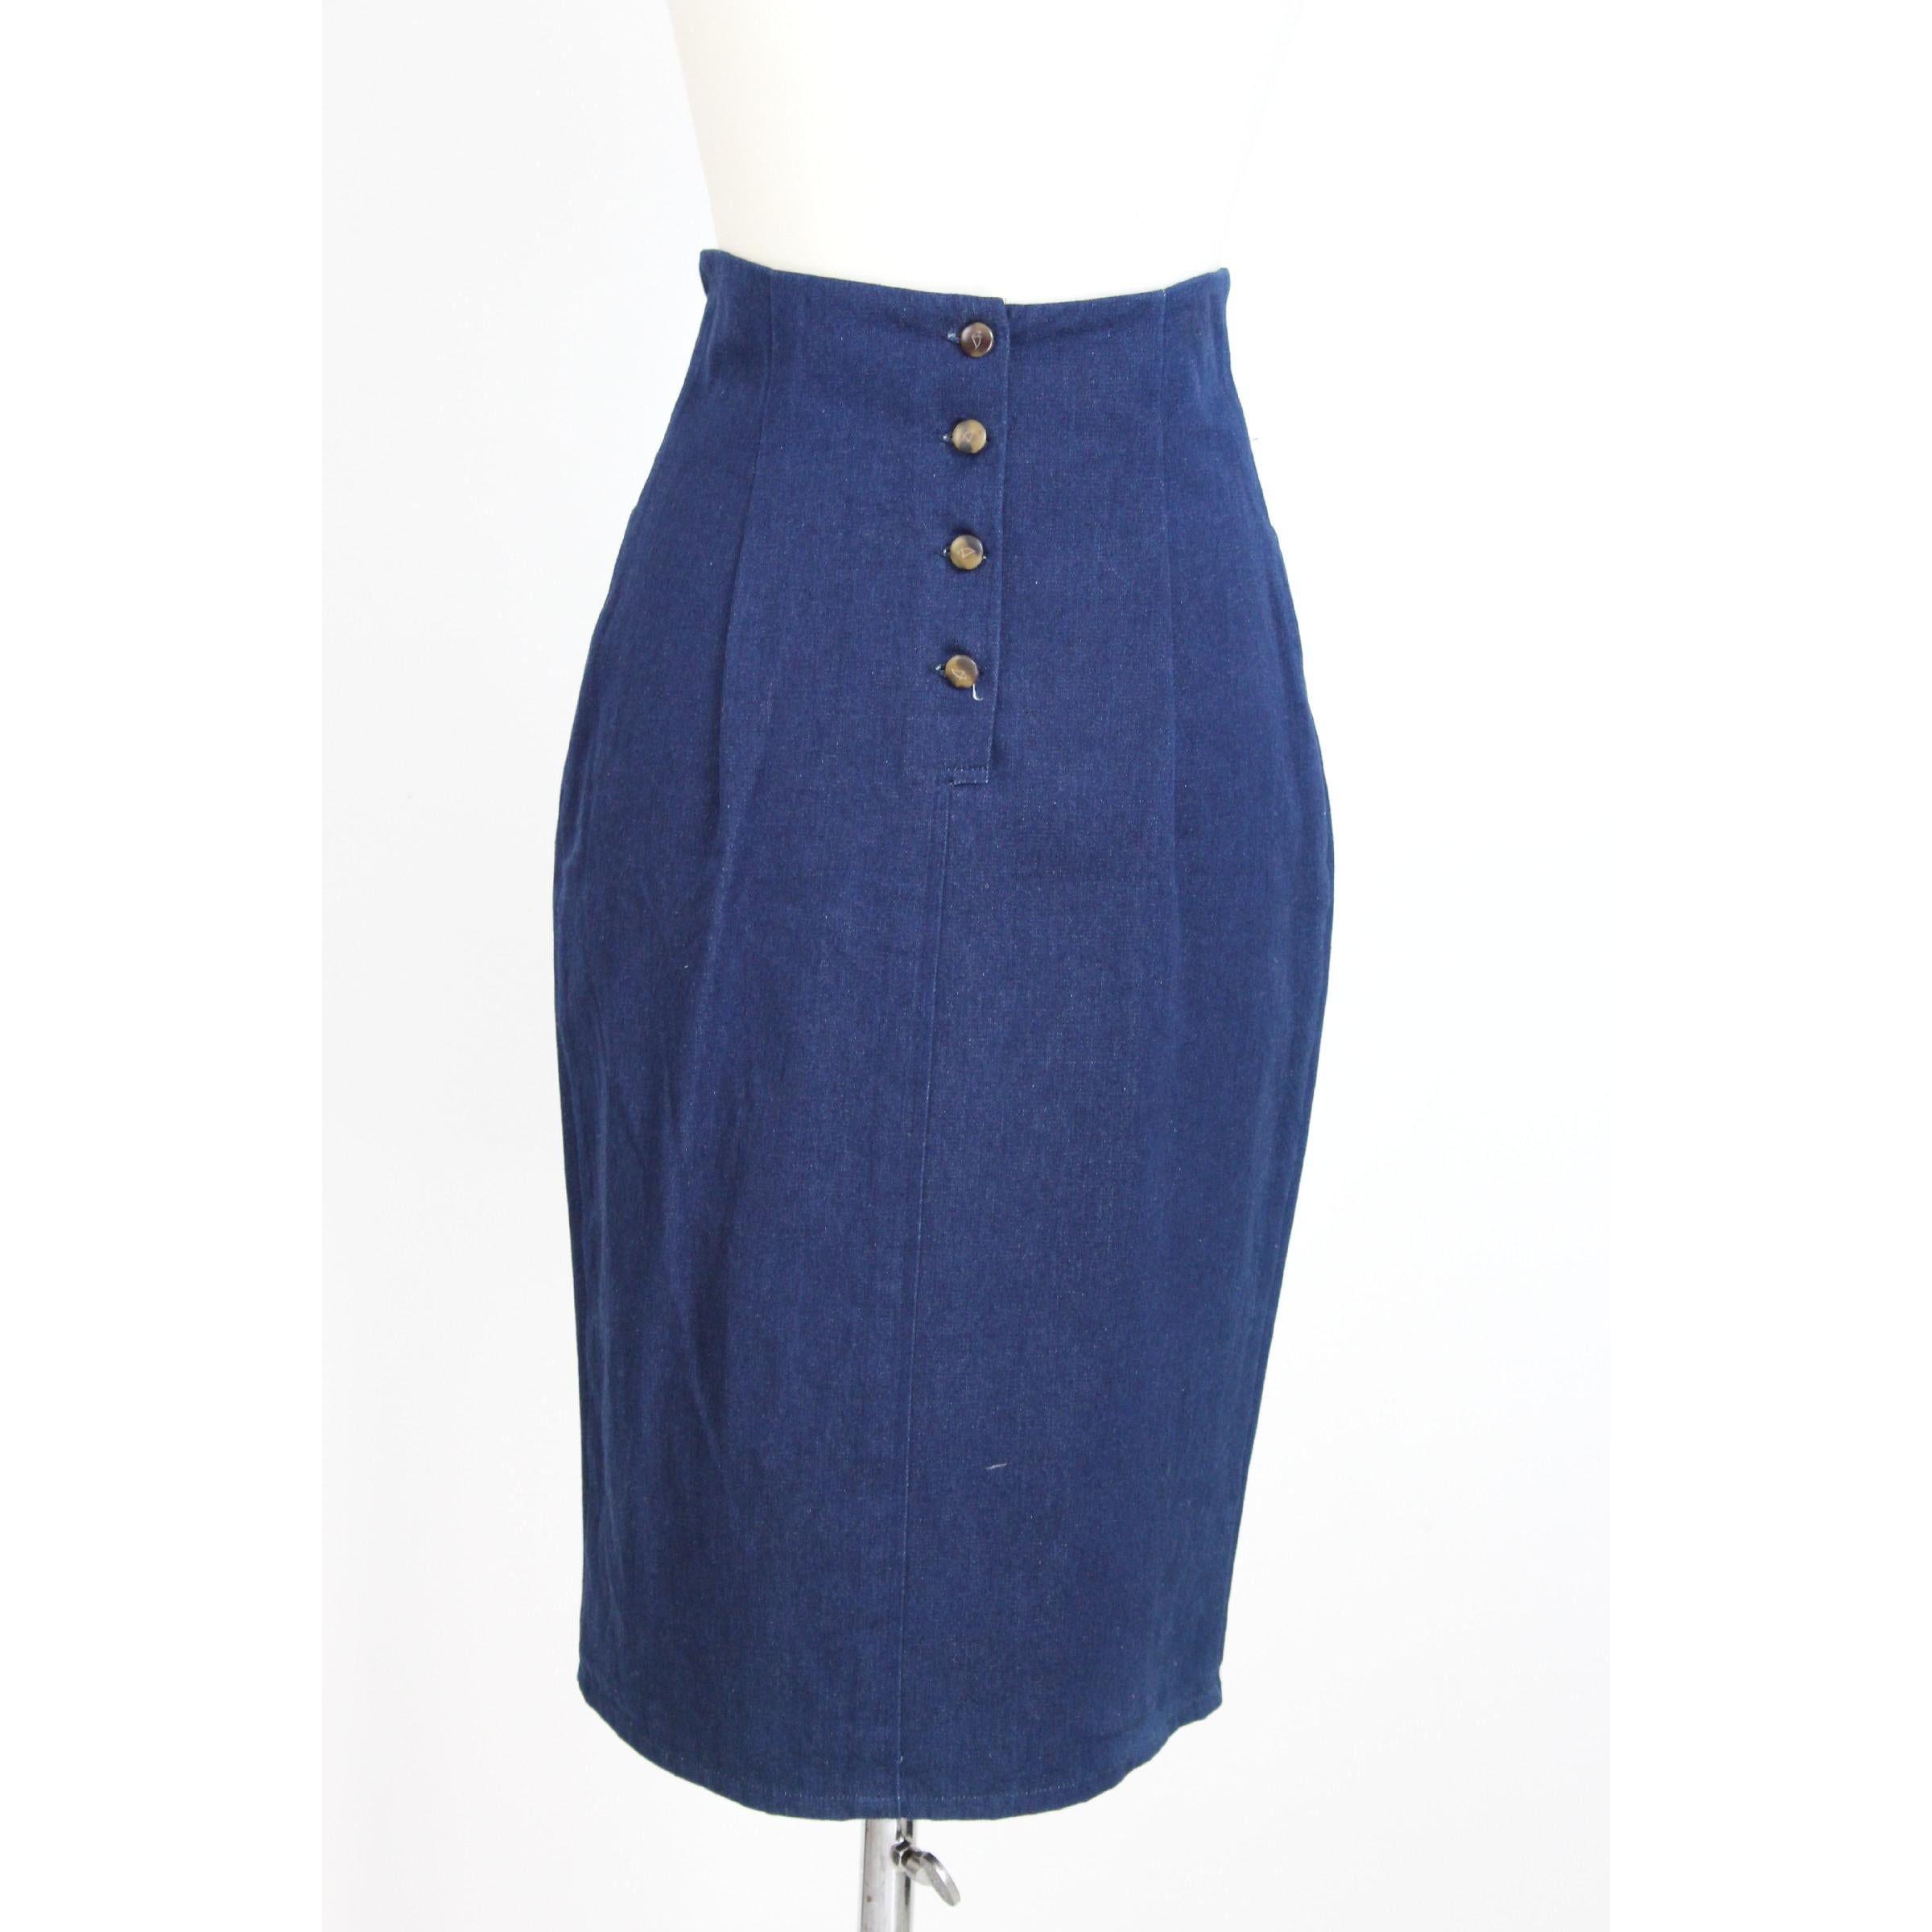 Arfango Blue Denim Sheath Jeans Skirt In New Condition For Sale In Brindisi, Bt